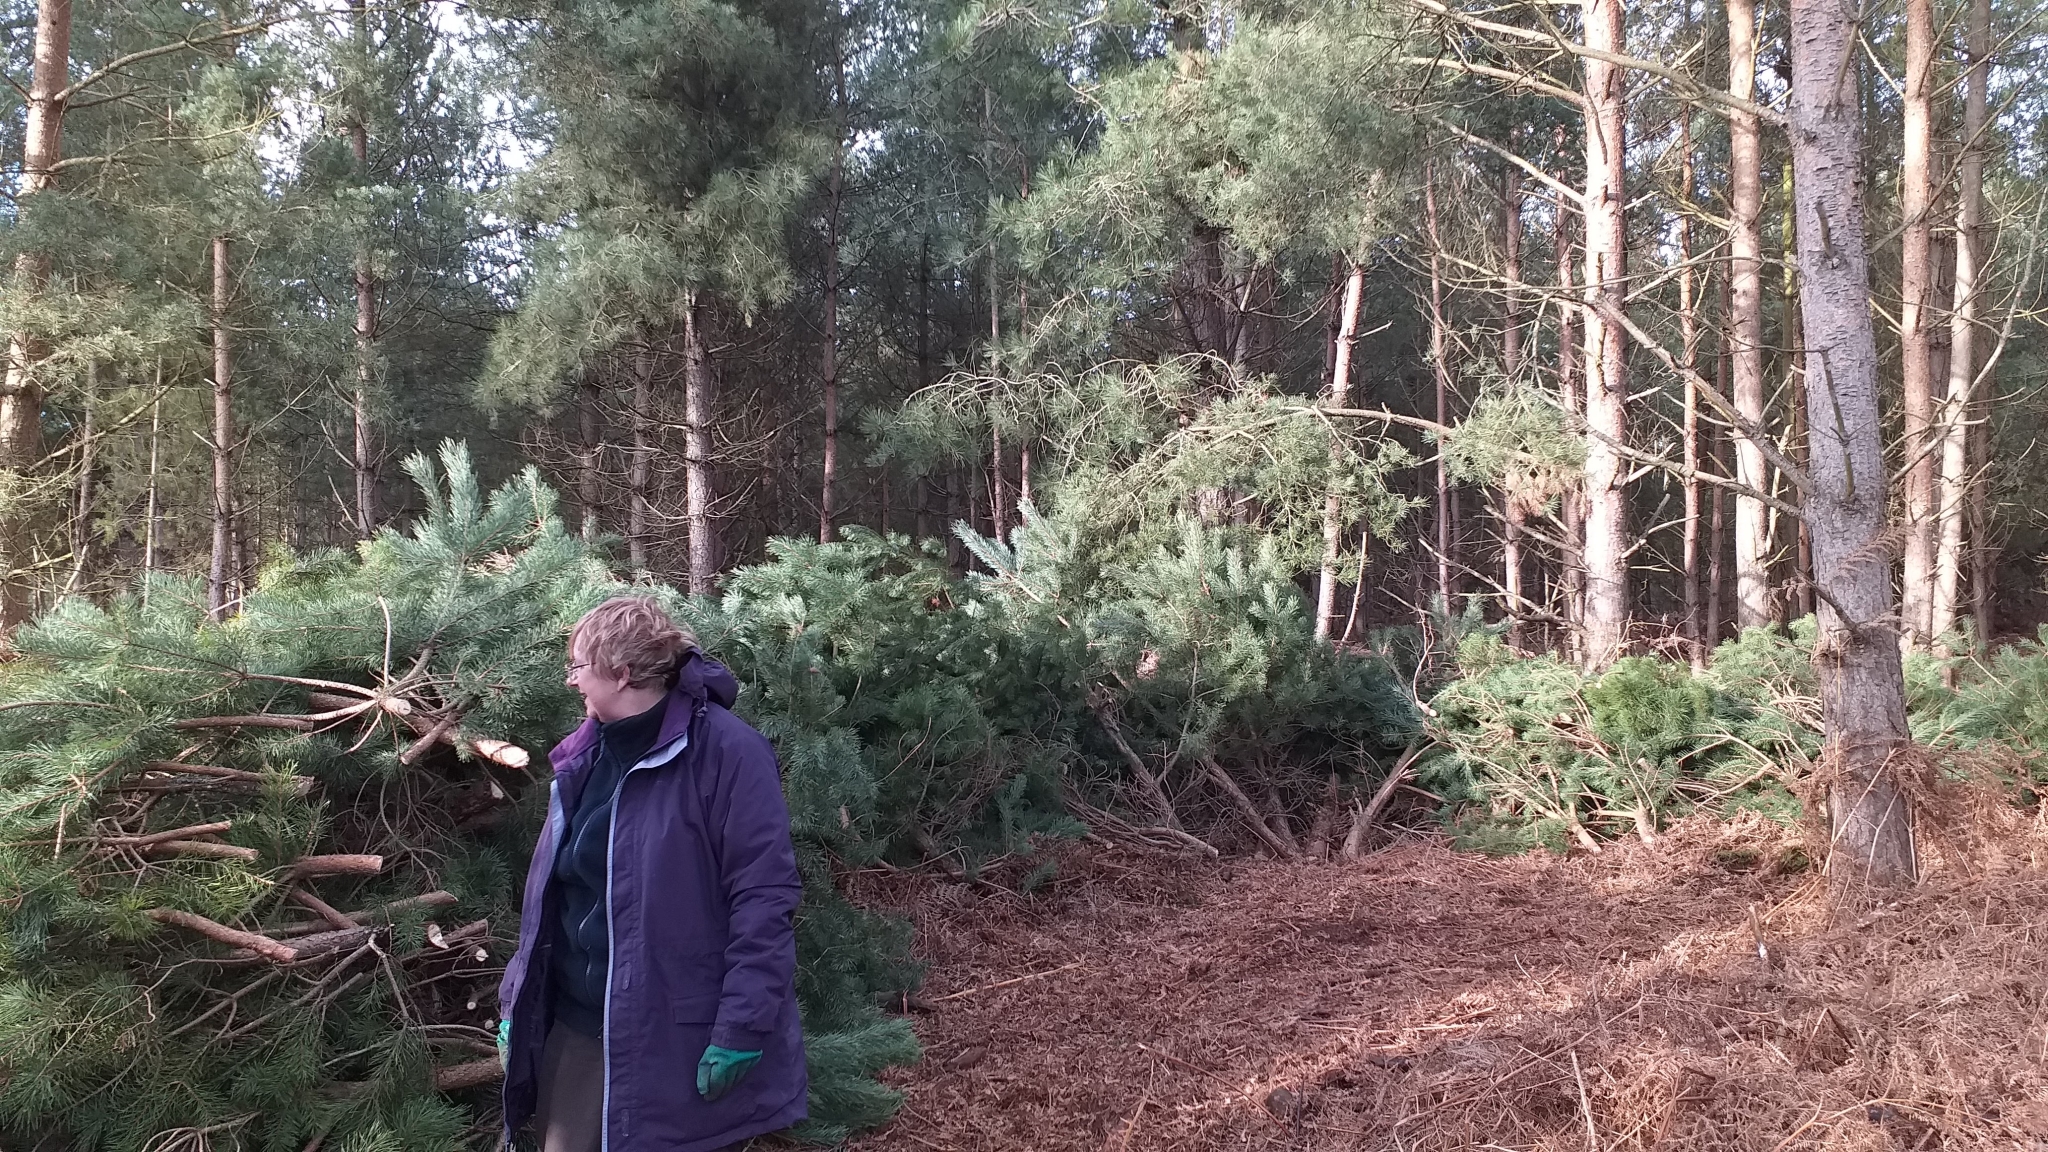 A photo from the FoTF Conservation Event - December 2019 - Self Seeded Pine Tree Removal on the Goshawk Trail : A volunteers stands in front off a large pile of removed pine trees